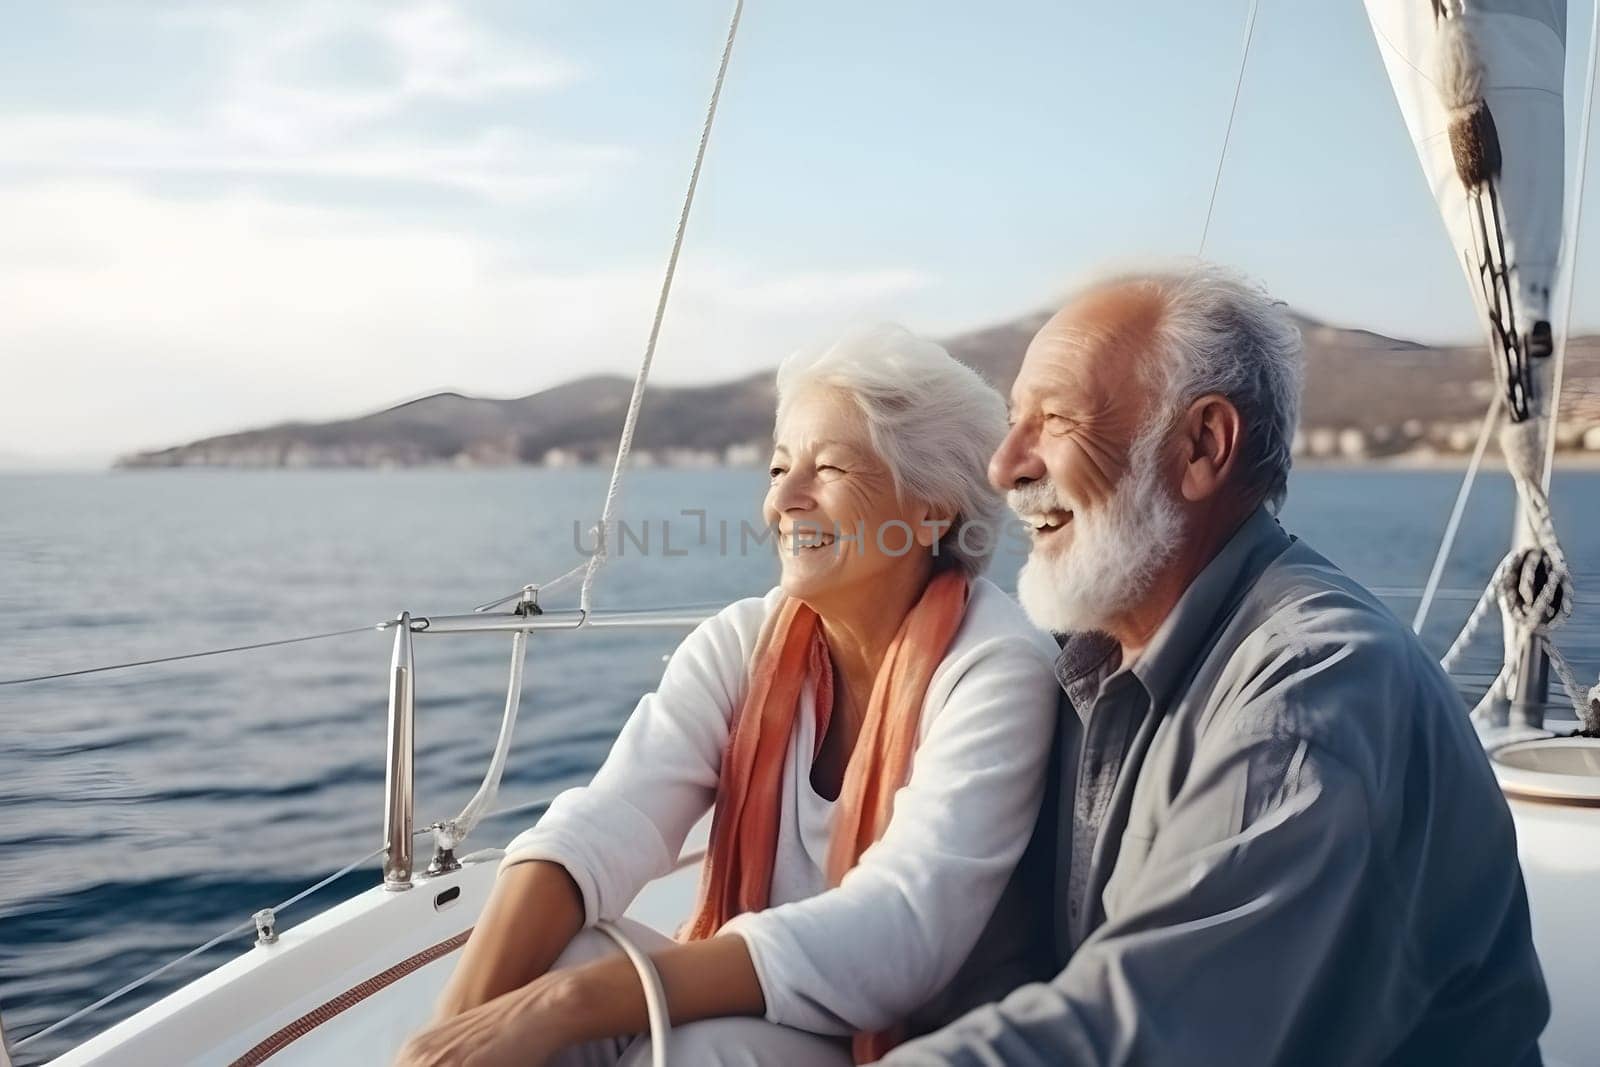 Beautiful and happy senior caucasian couple on a sailboat at sunny day. Neural network generated in May 2023. Not based on any actual person, scene or pattern.